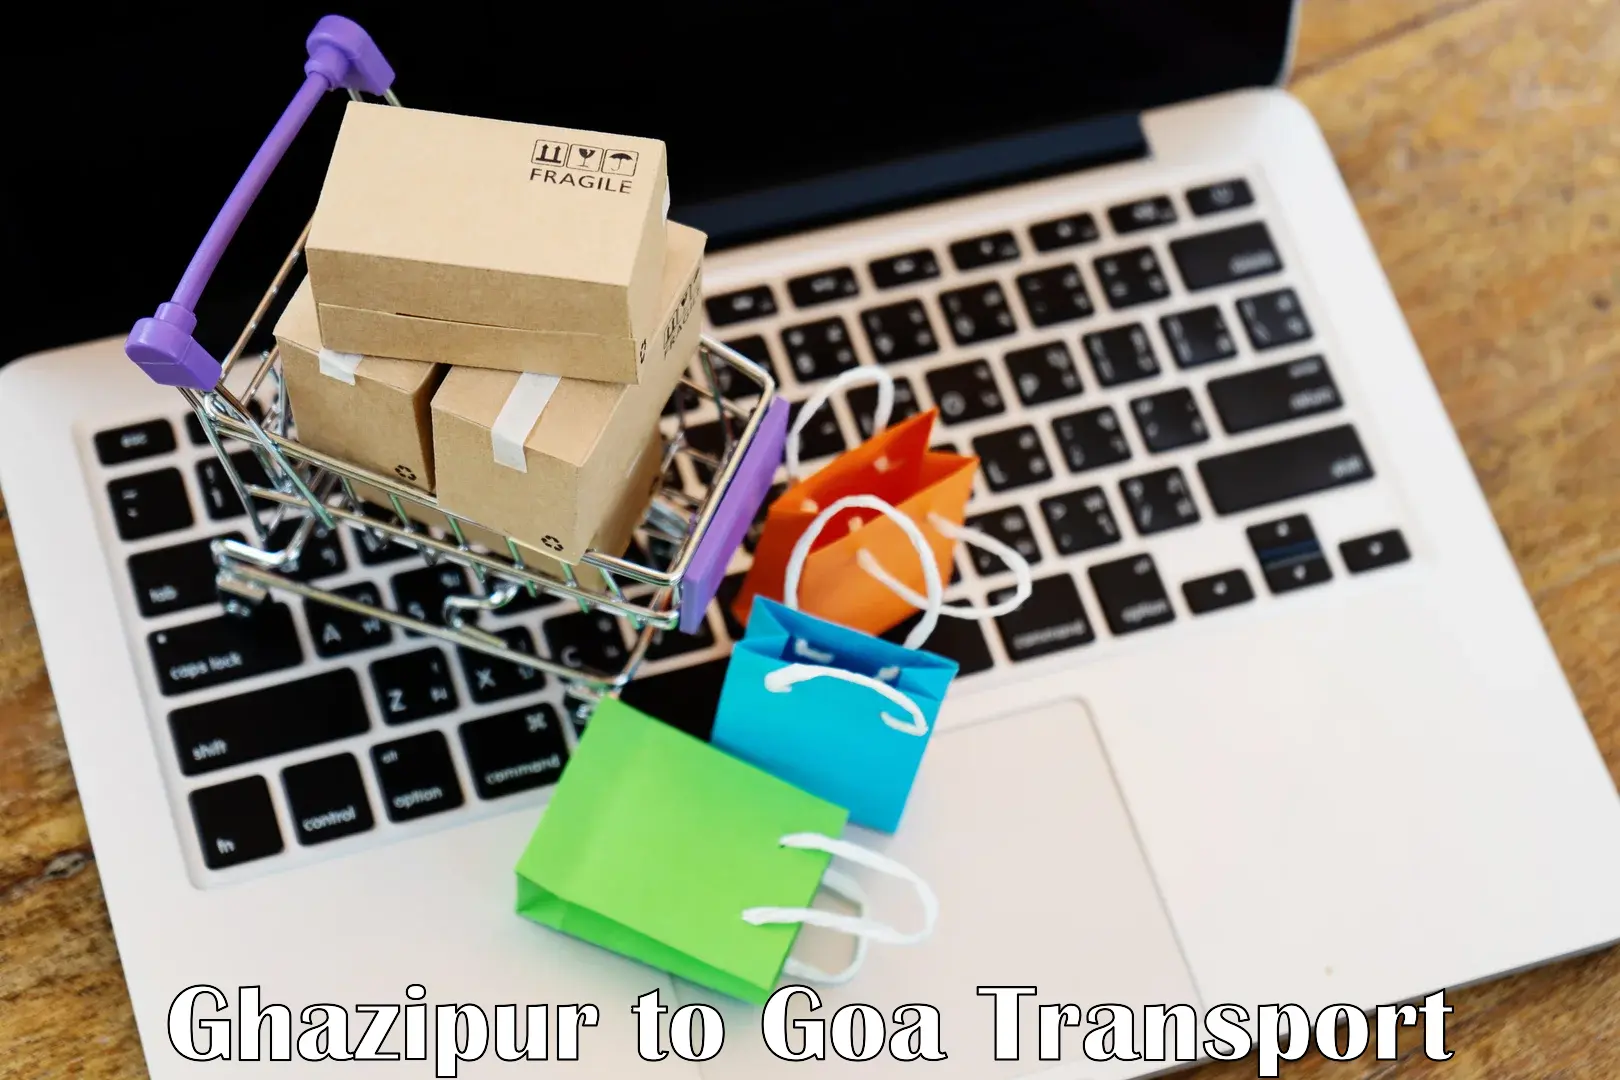 Nearby transport service Ghazipur to Mormugao Port